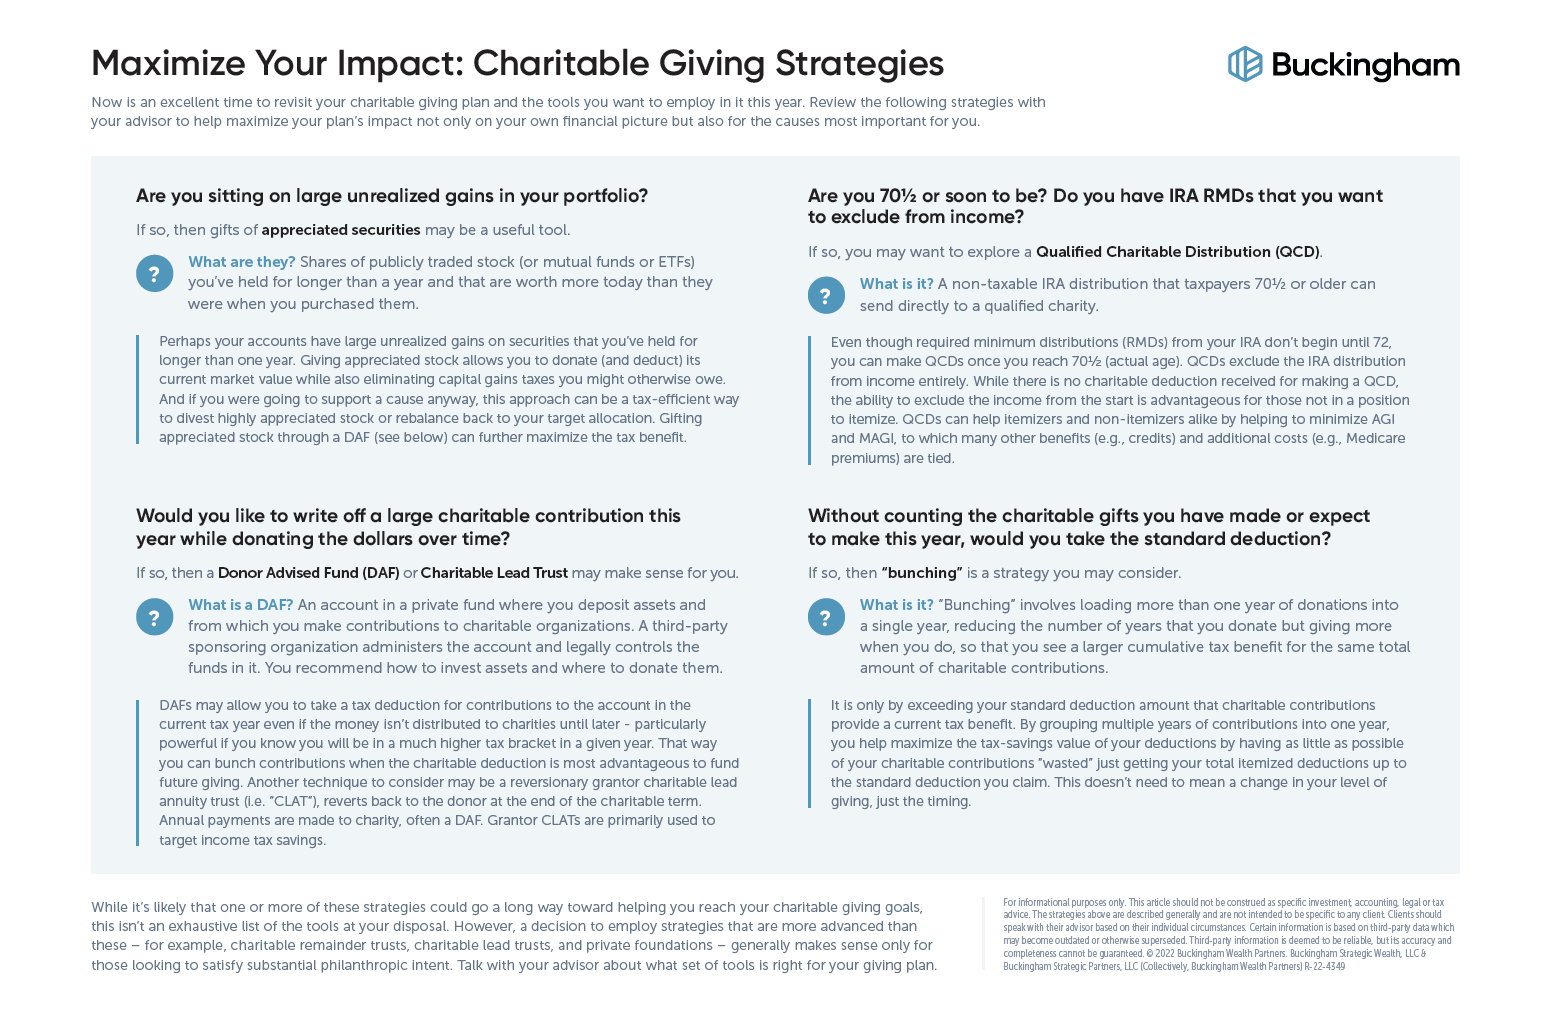 Maximize Your Impact: Charitable Giving Strategies